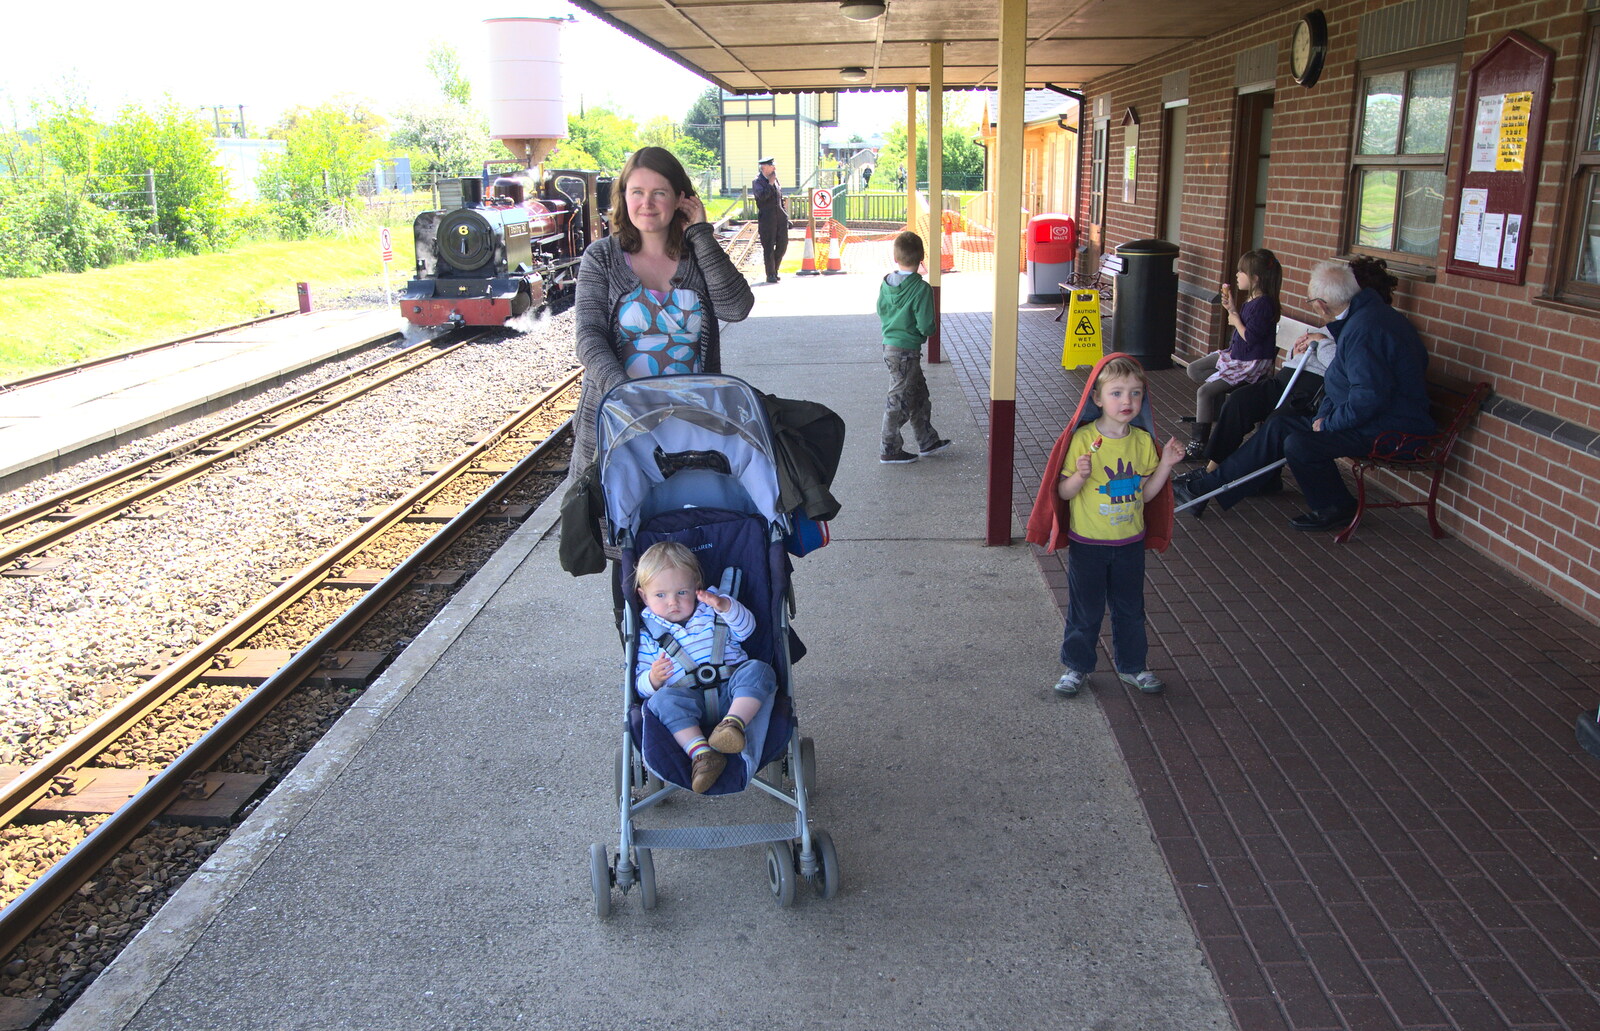 Isobel, Harry and Fred at the station from The Bure Valley Railway, Aylsham, Norfolk - 26th May 2013